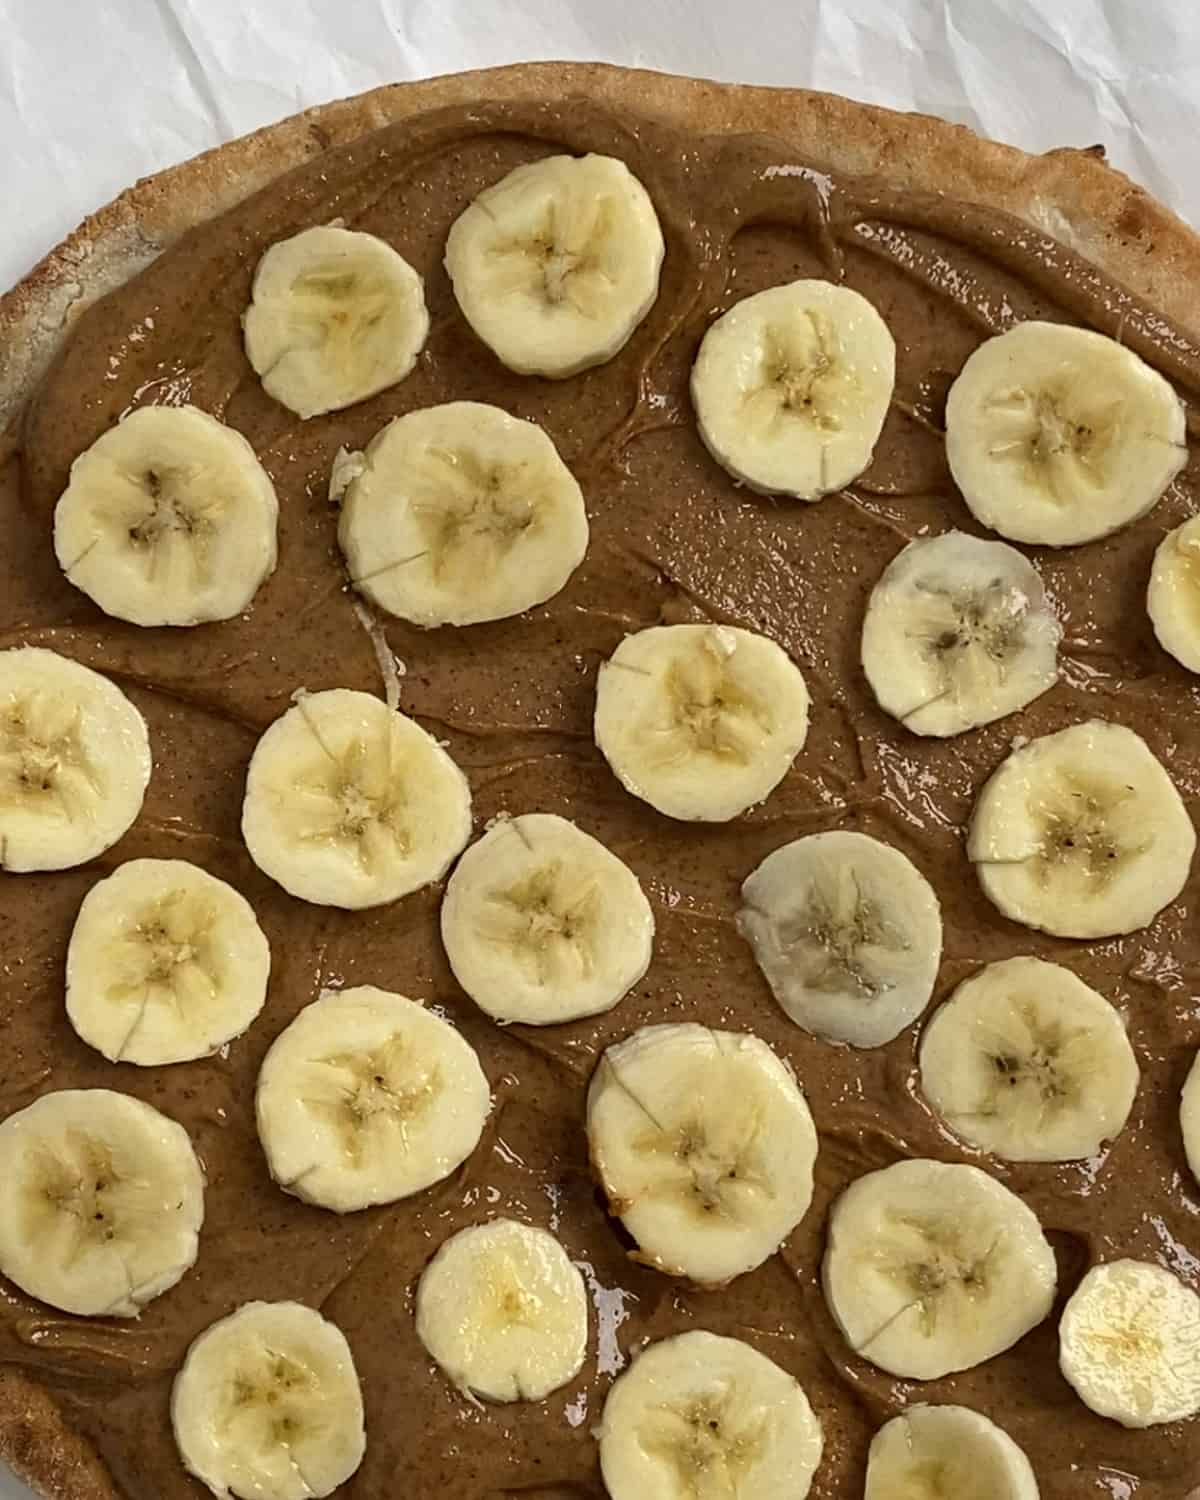 process of adding sliced bananas to fruit pizza